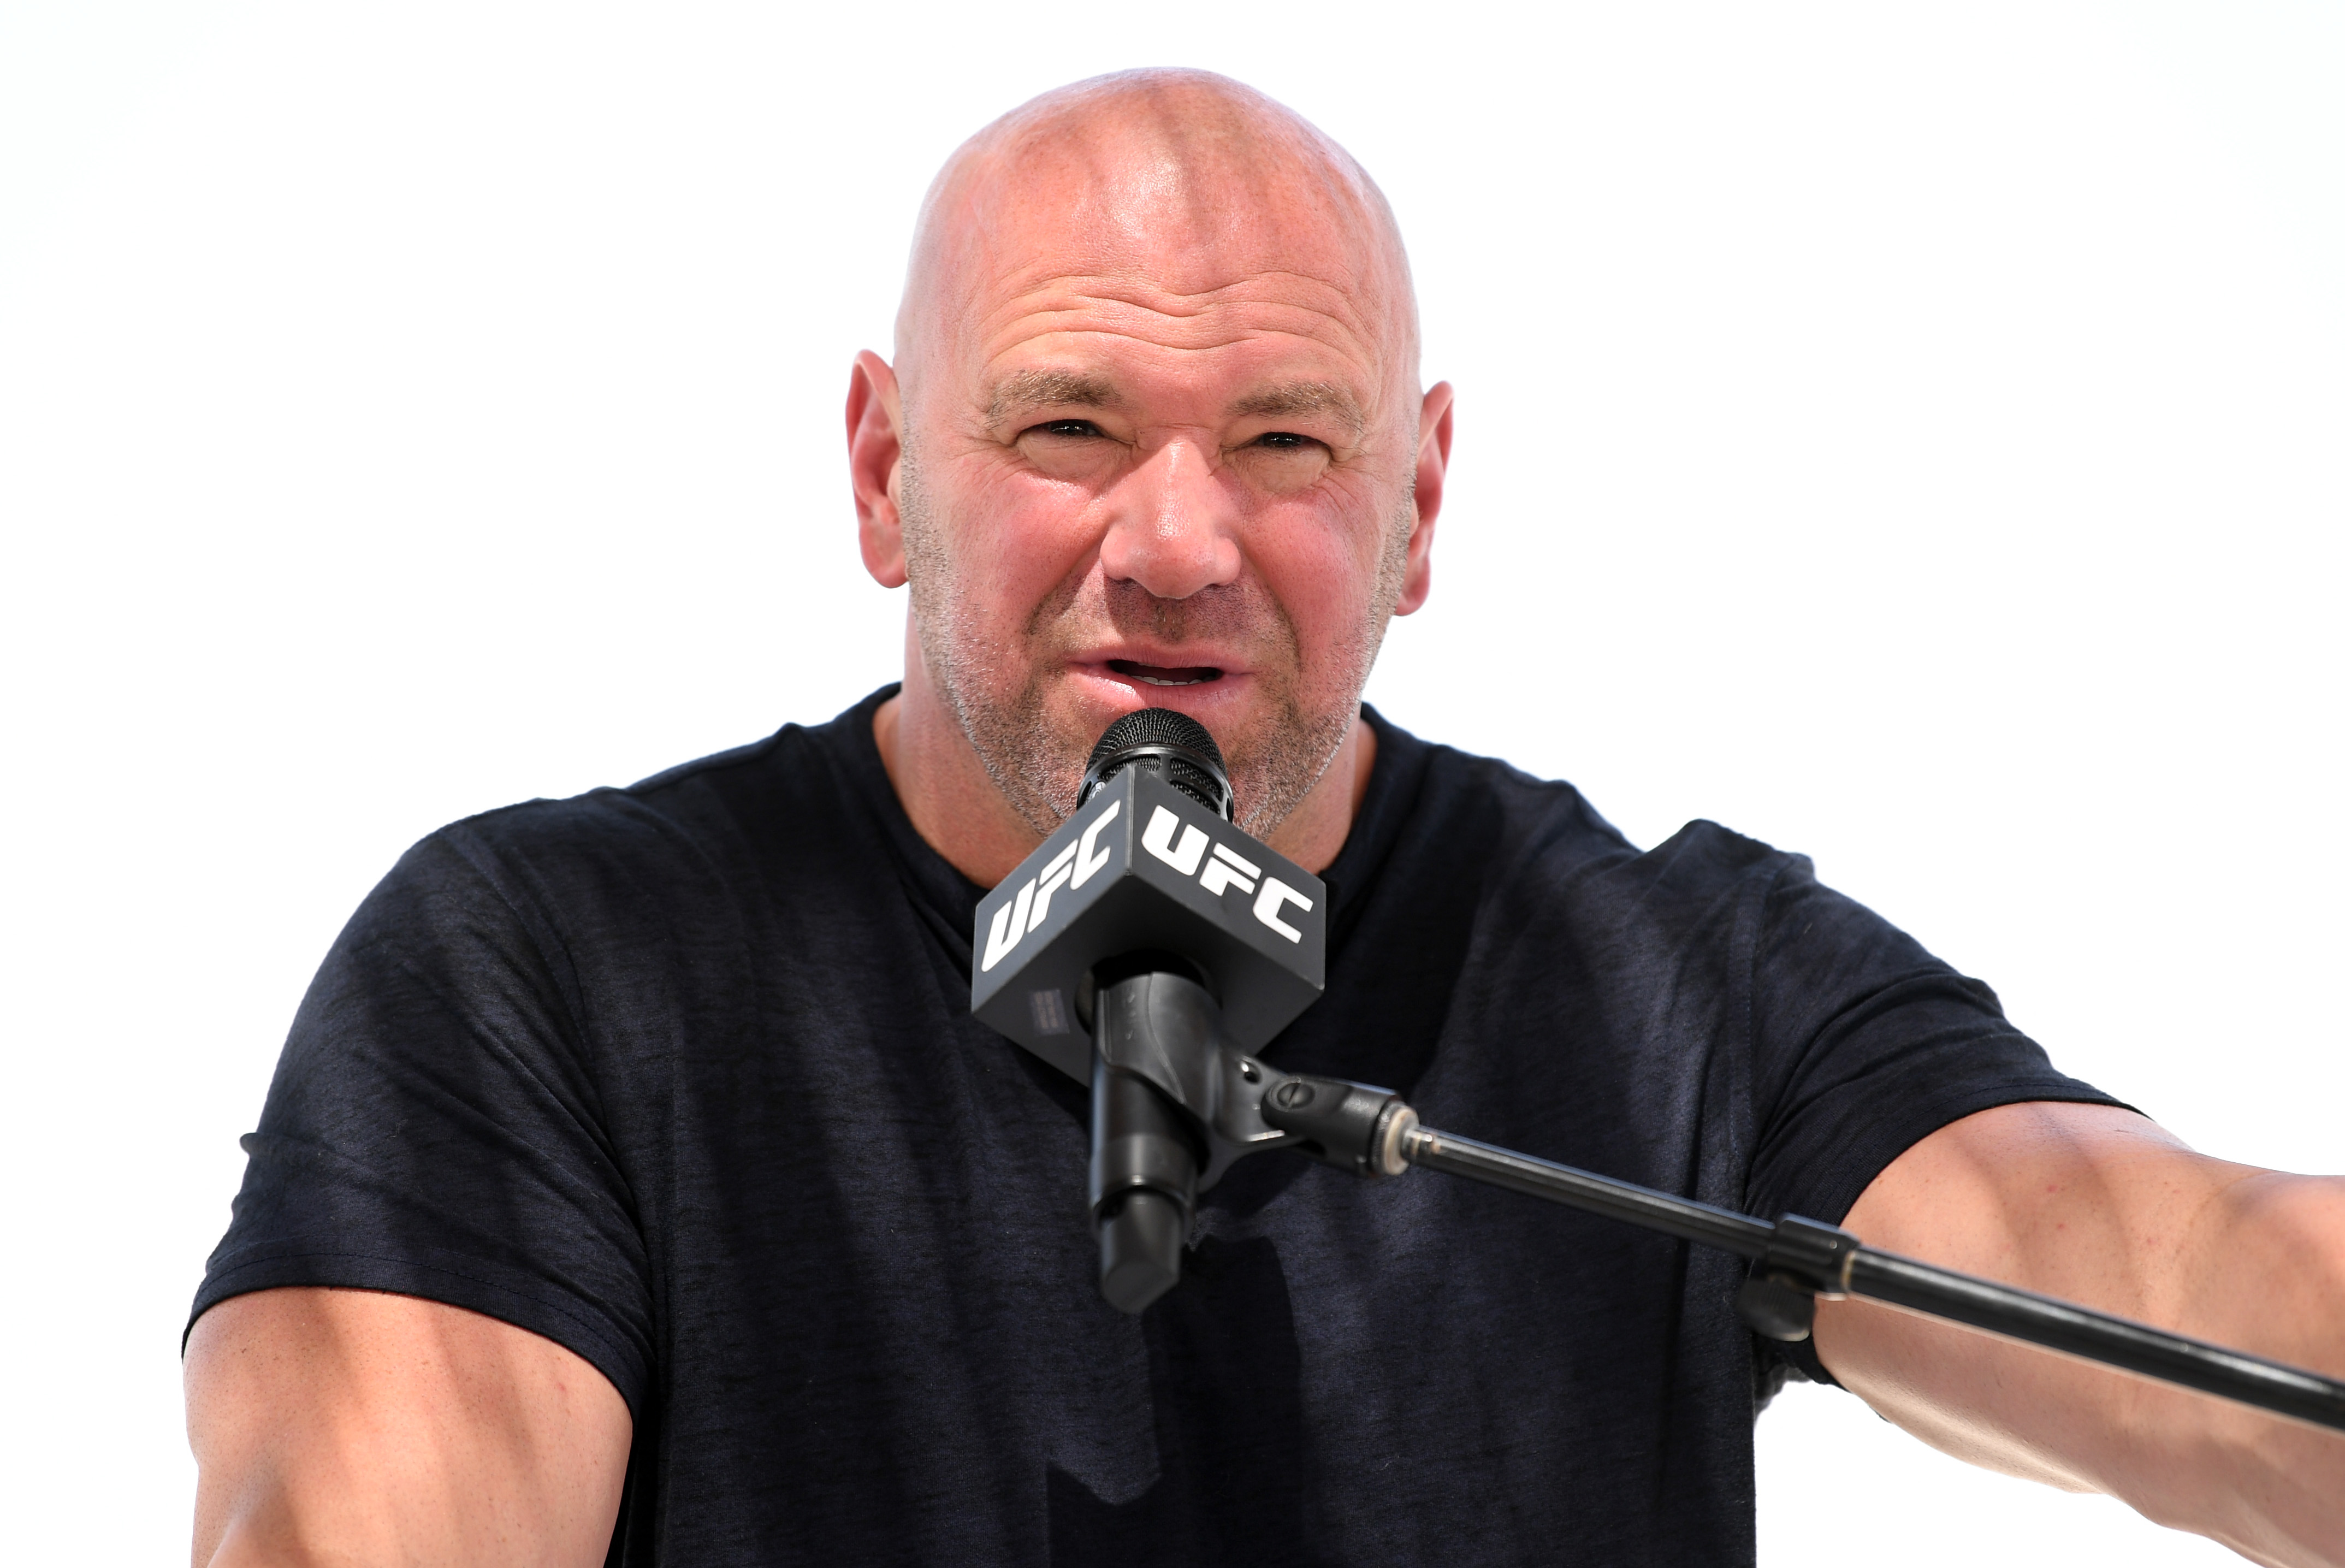 Dana White Just Sent a Stern Message About He’s Going To Handle UFC Fighters